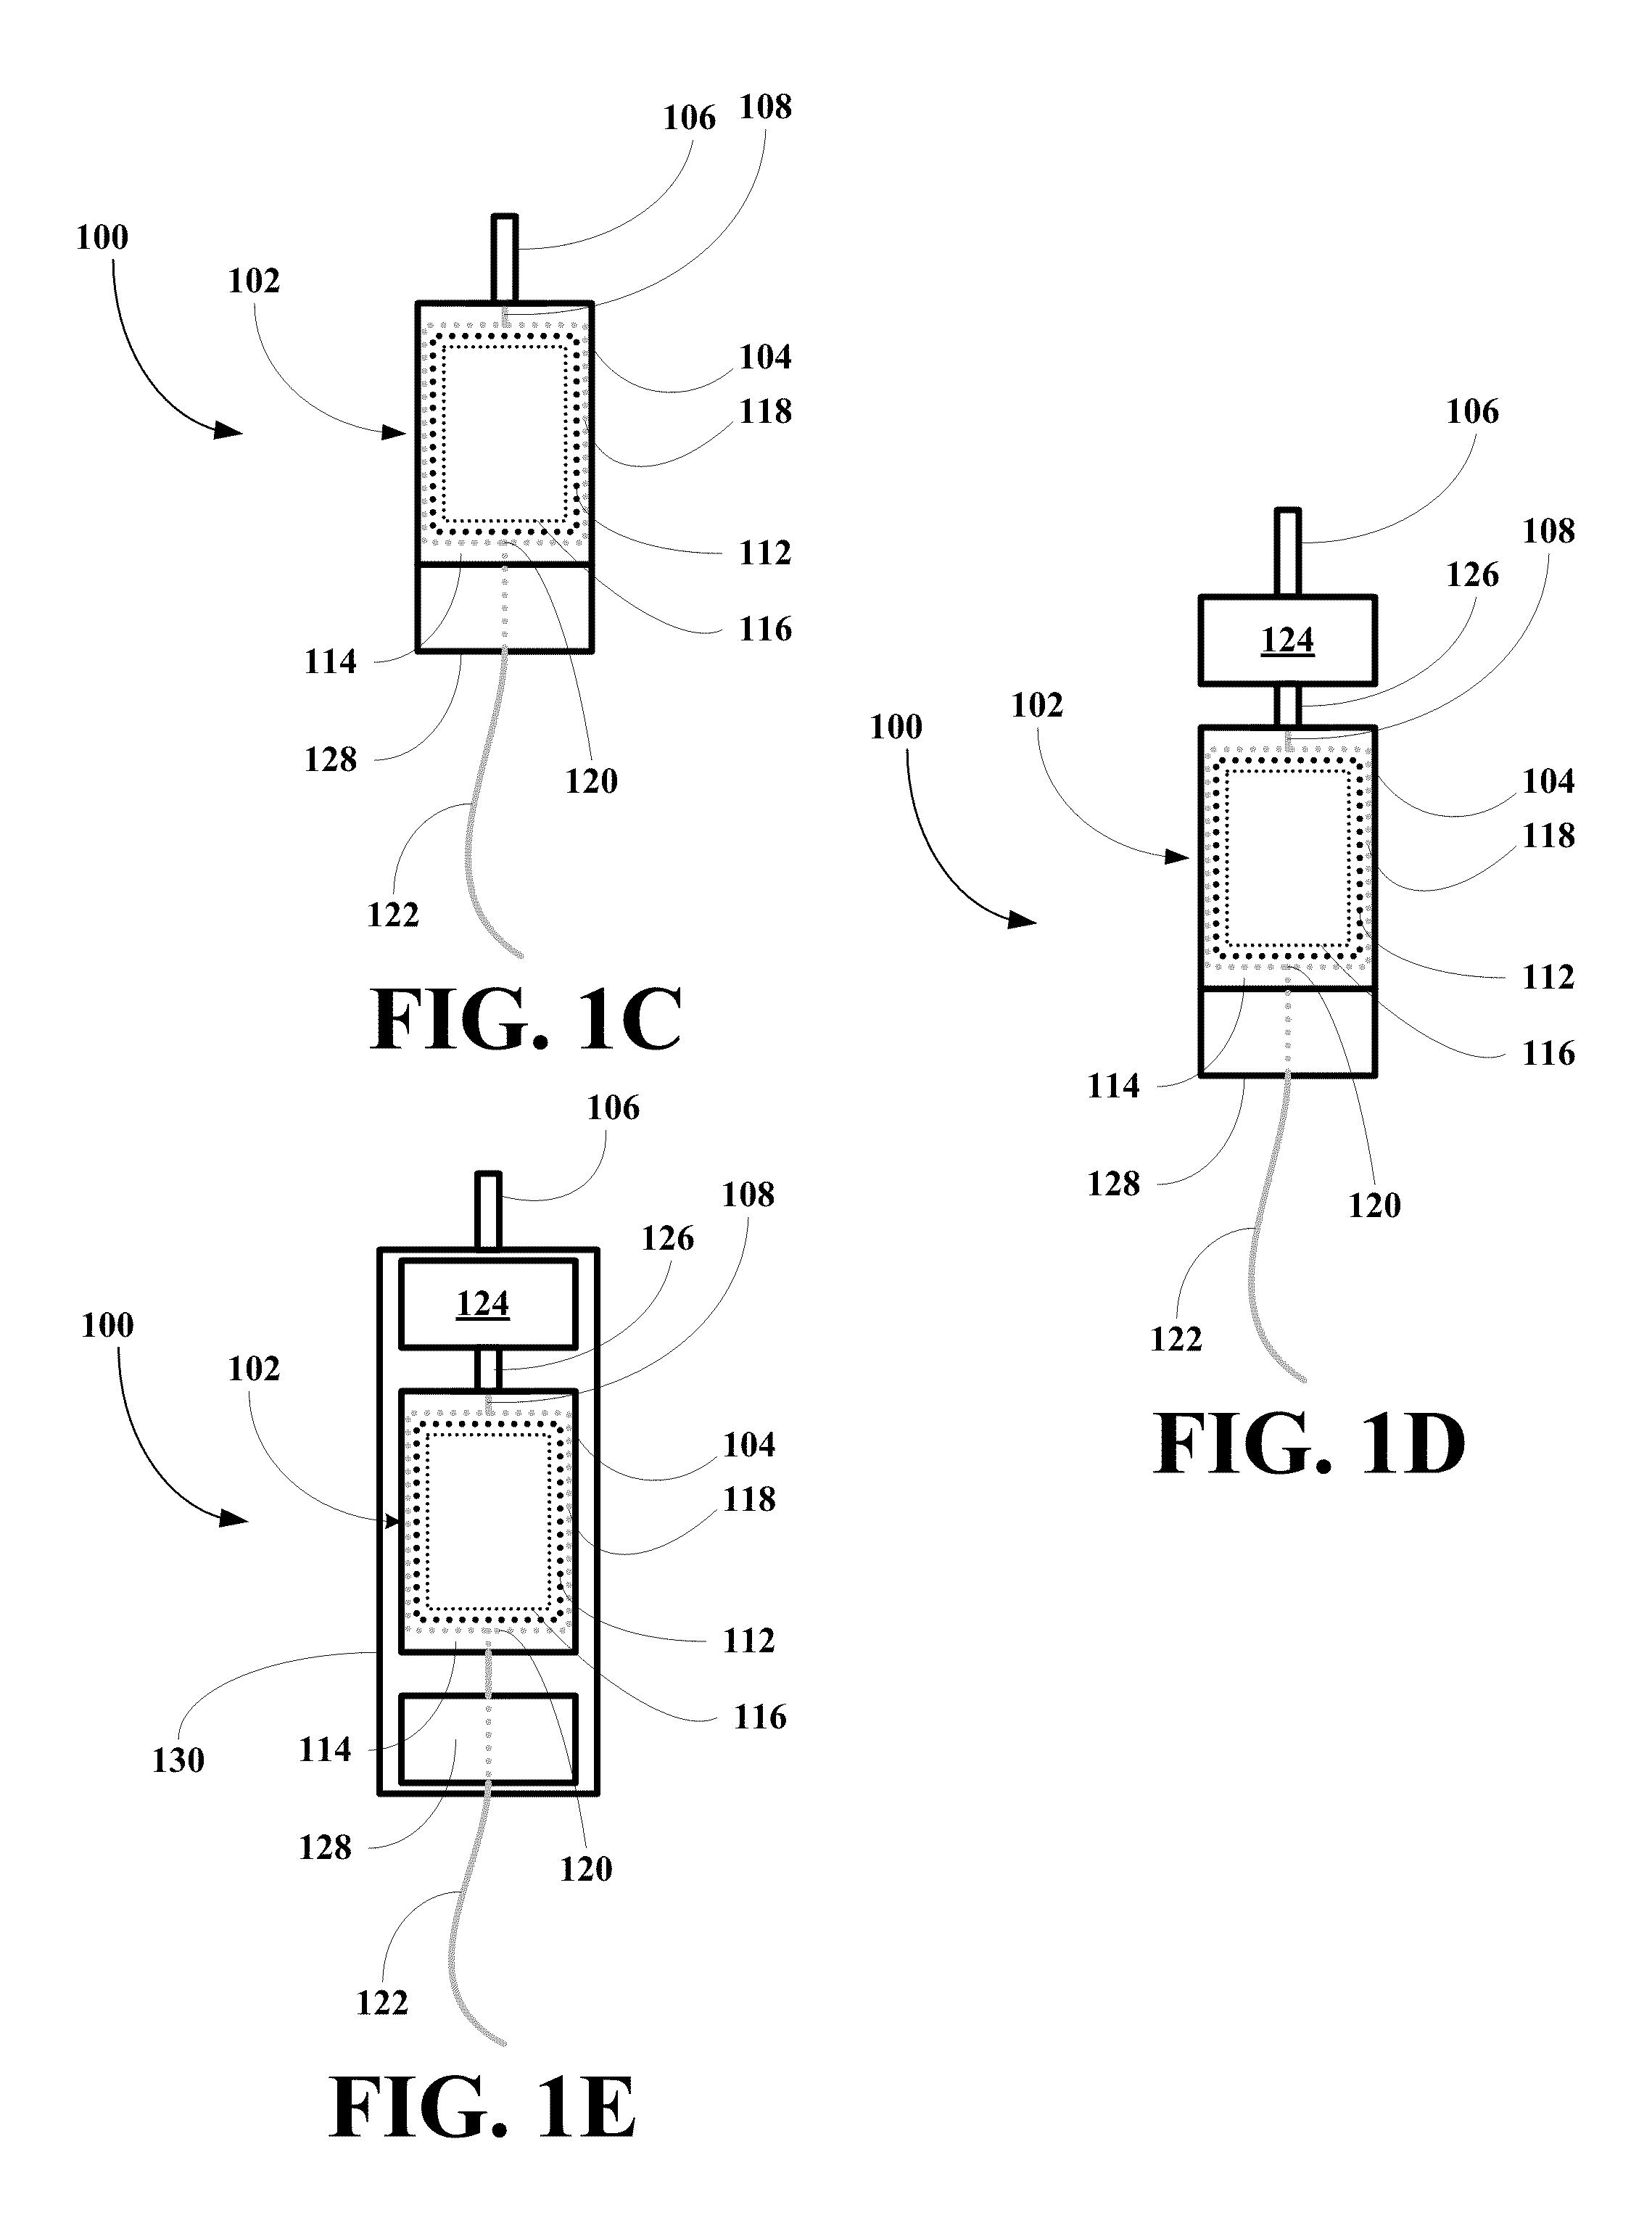 Fluid Balance Monitoring System with Fluid Infusion Pump for Medical Treatment